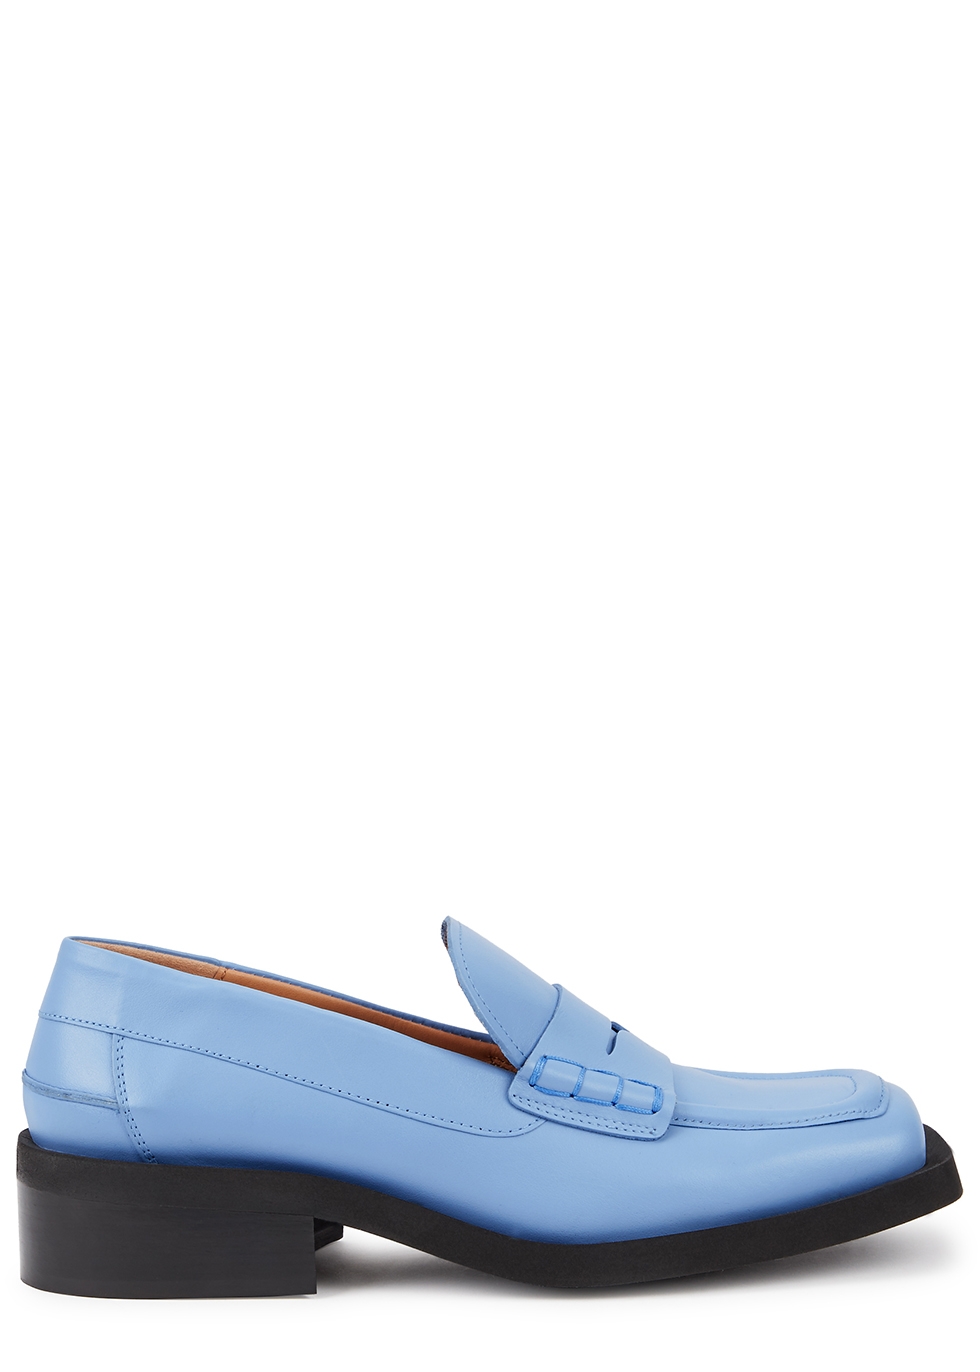 Light blue leather loafers